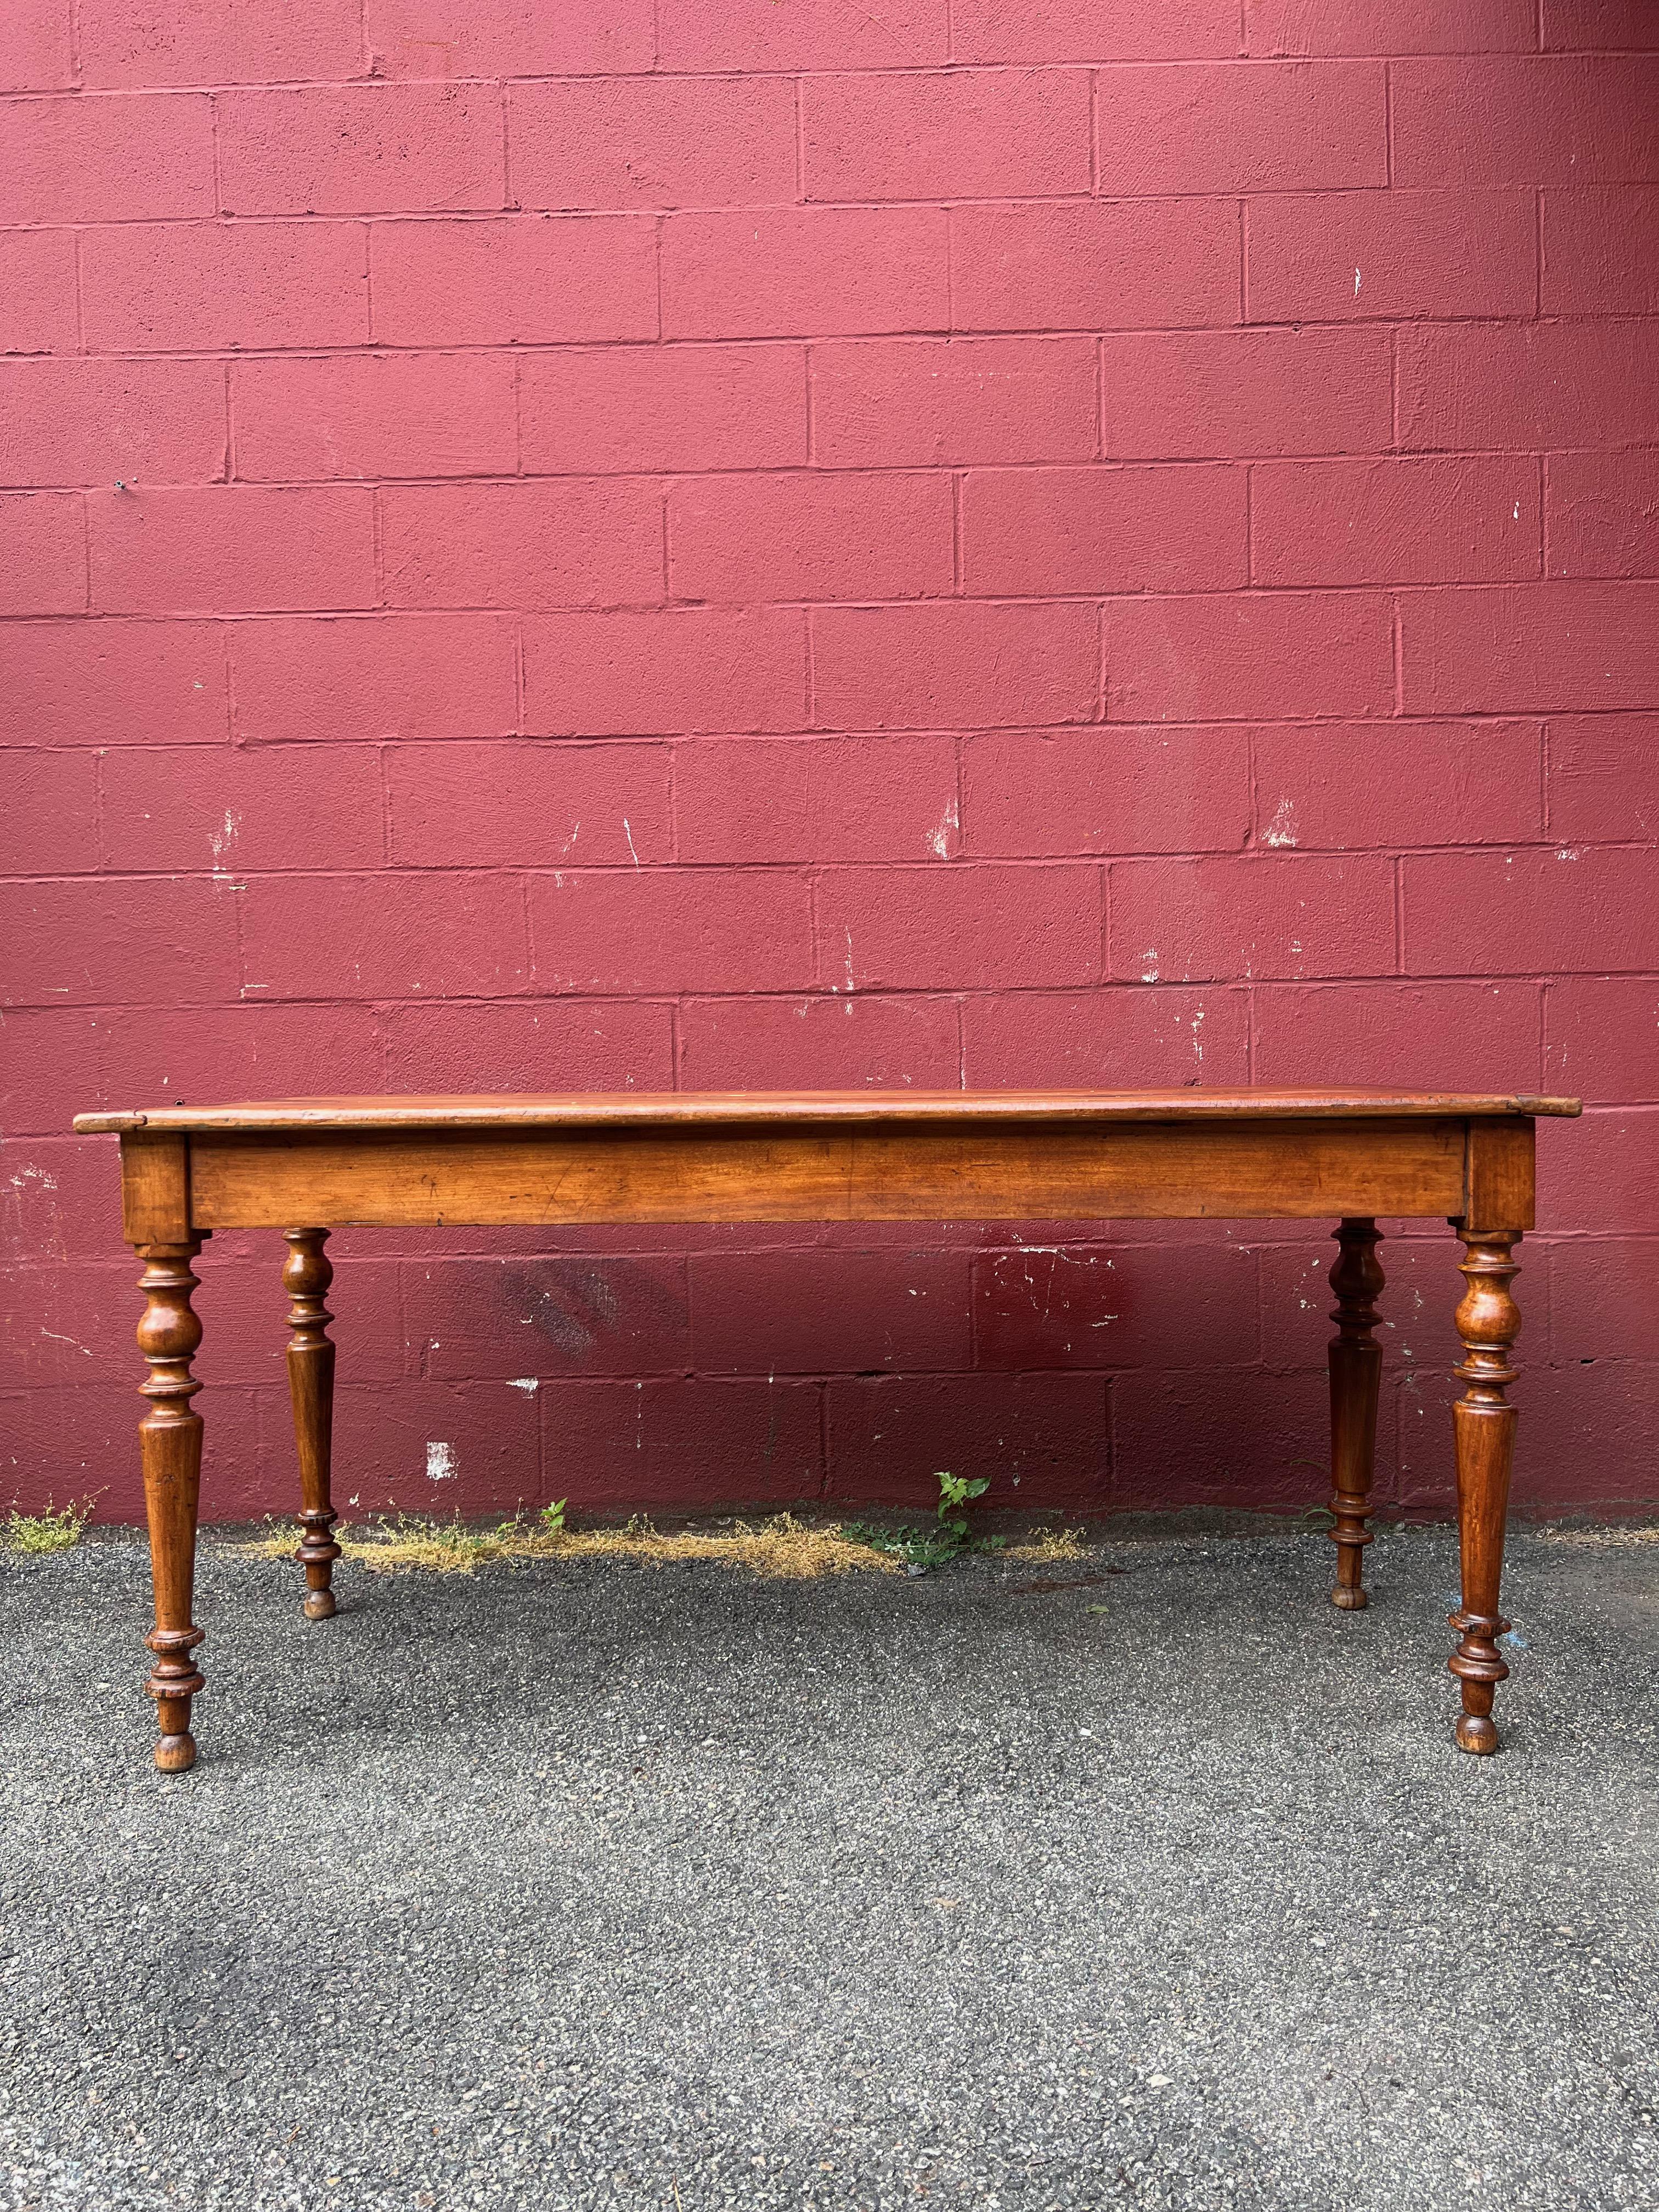 This large French work table is a stunning piece of craftsmanship constructed from beautiful cherry wood. The original rich patina gives the table a charming vintage feel that will add character and warmth to any space. The top of the table is